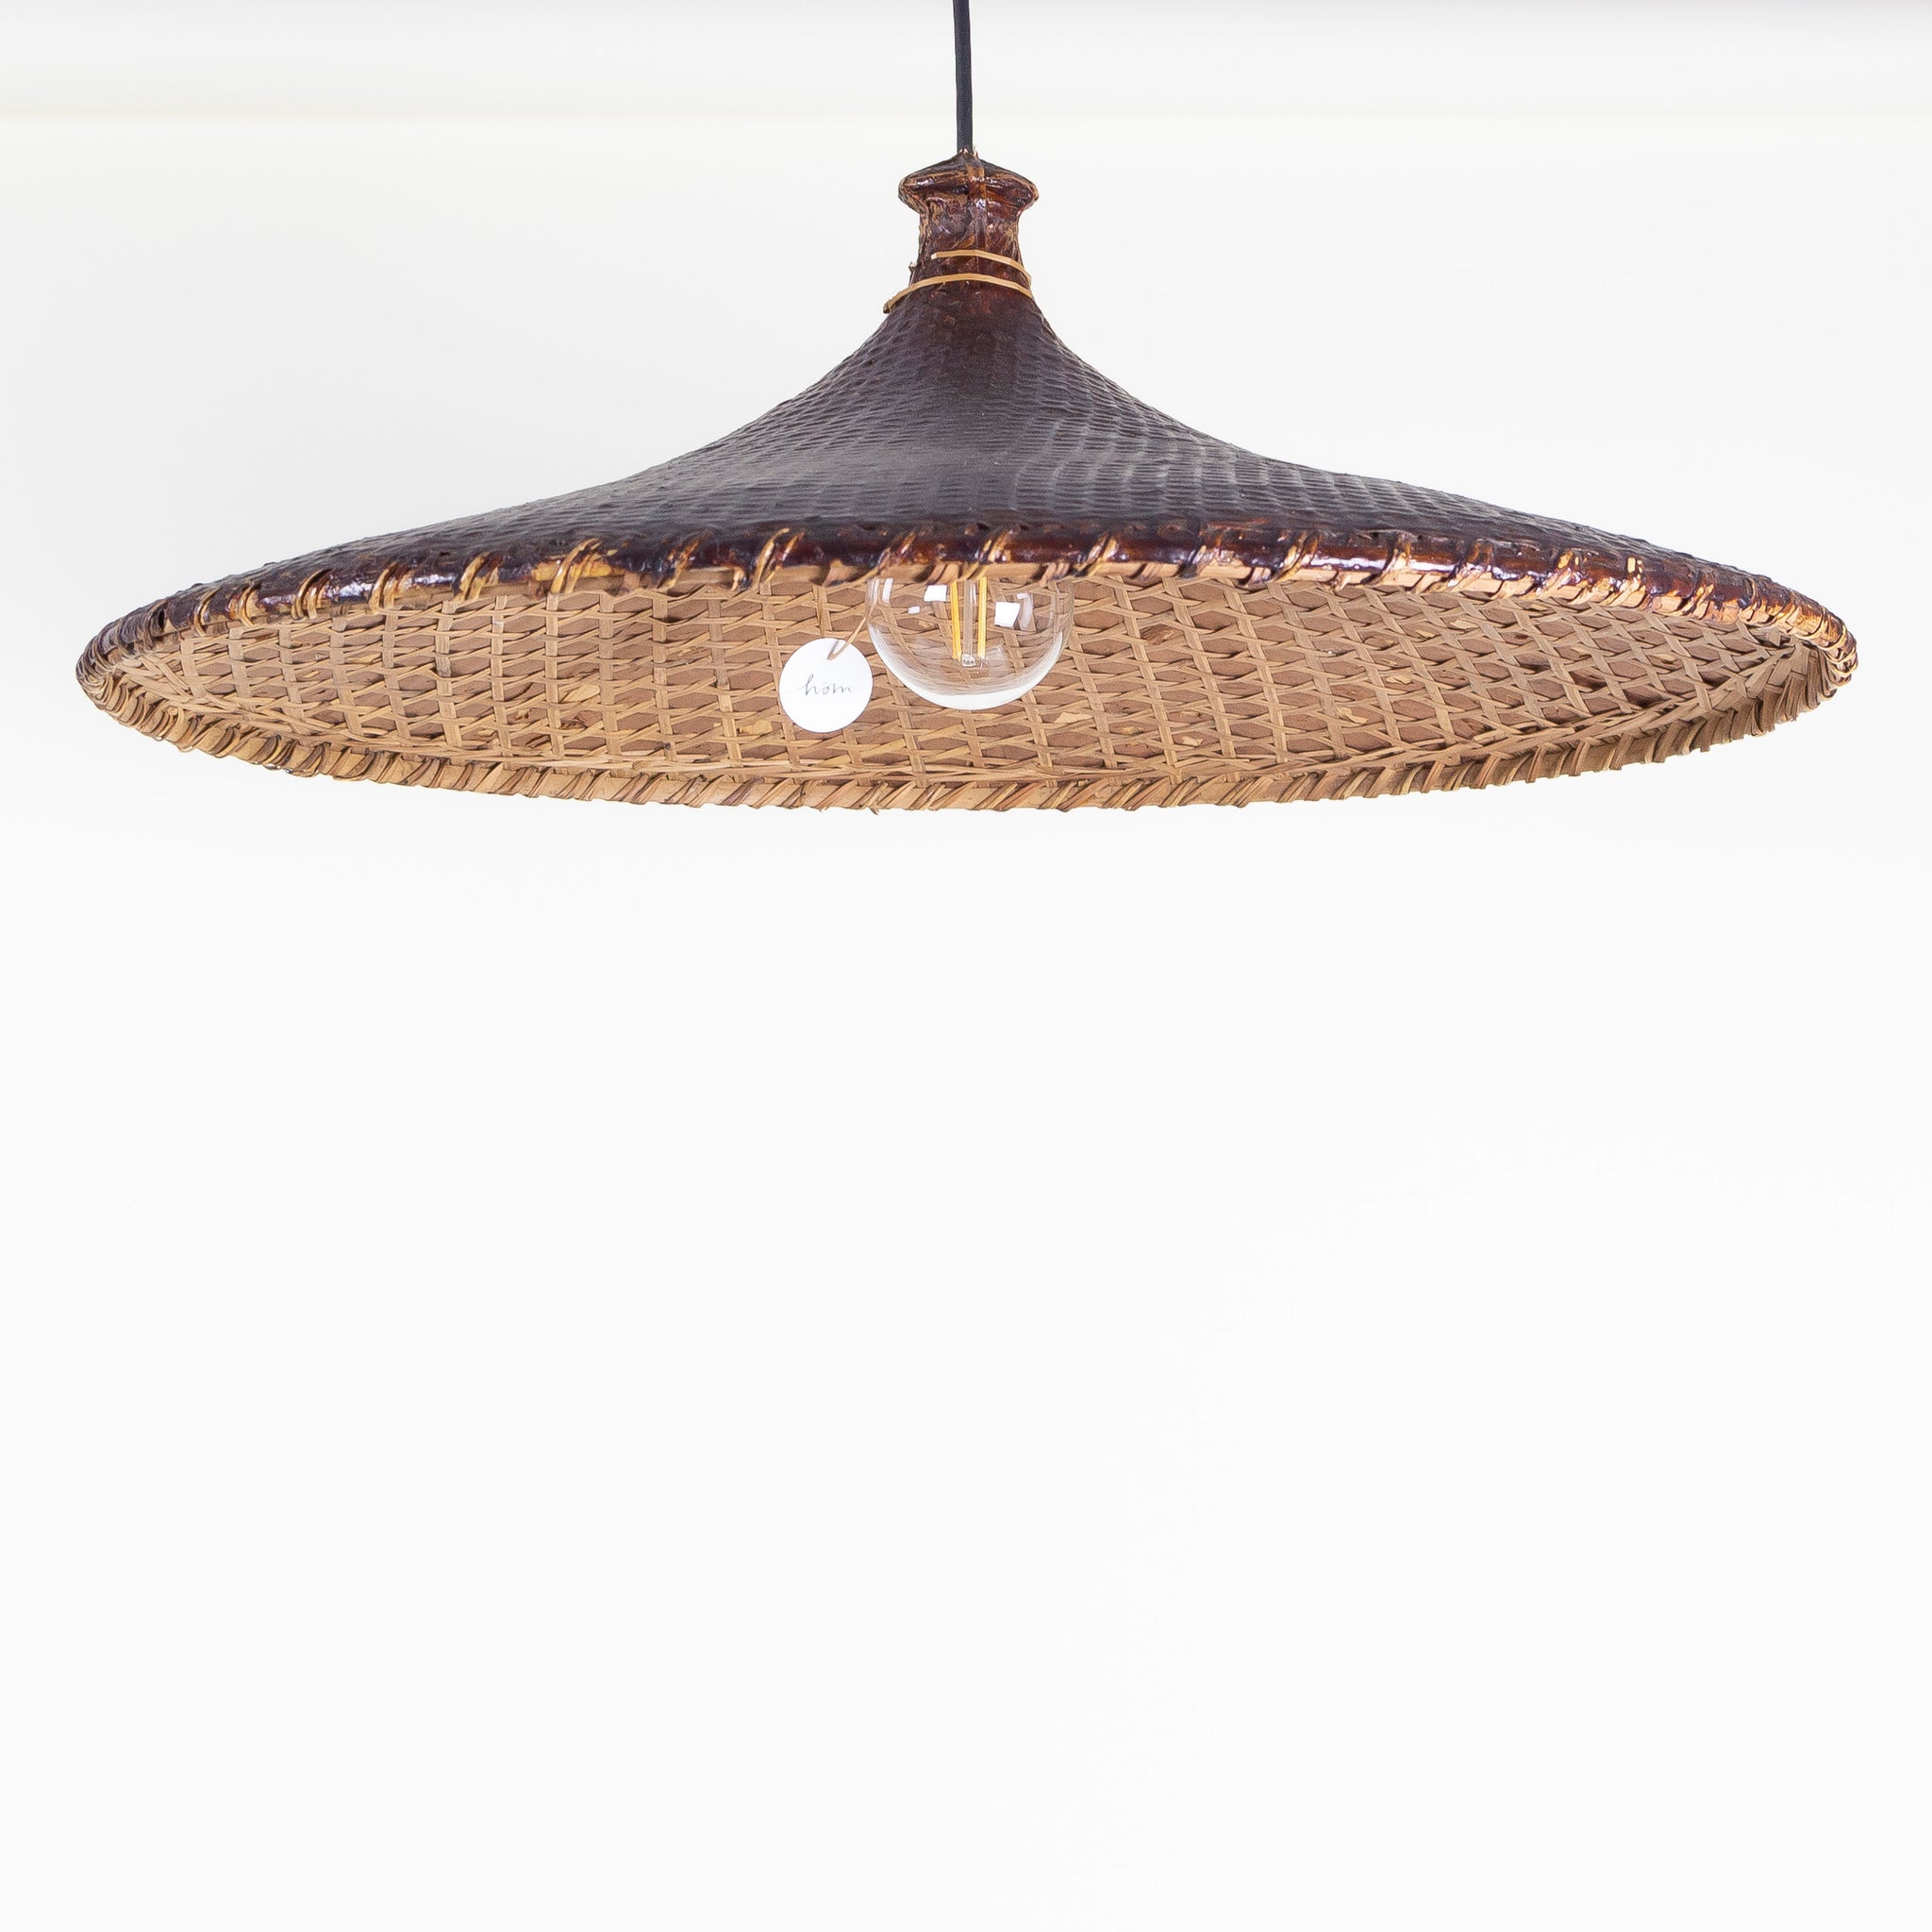 Vintage Chinese Hats turned into Pendant lights